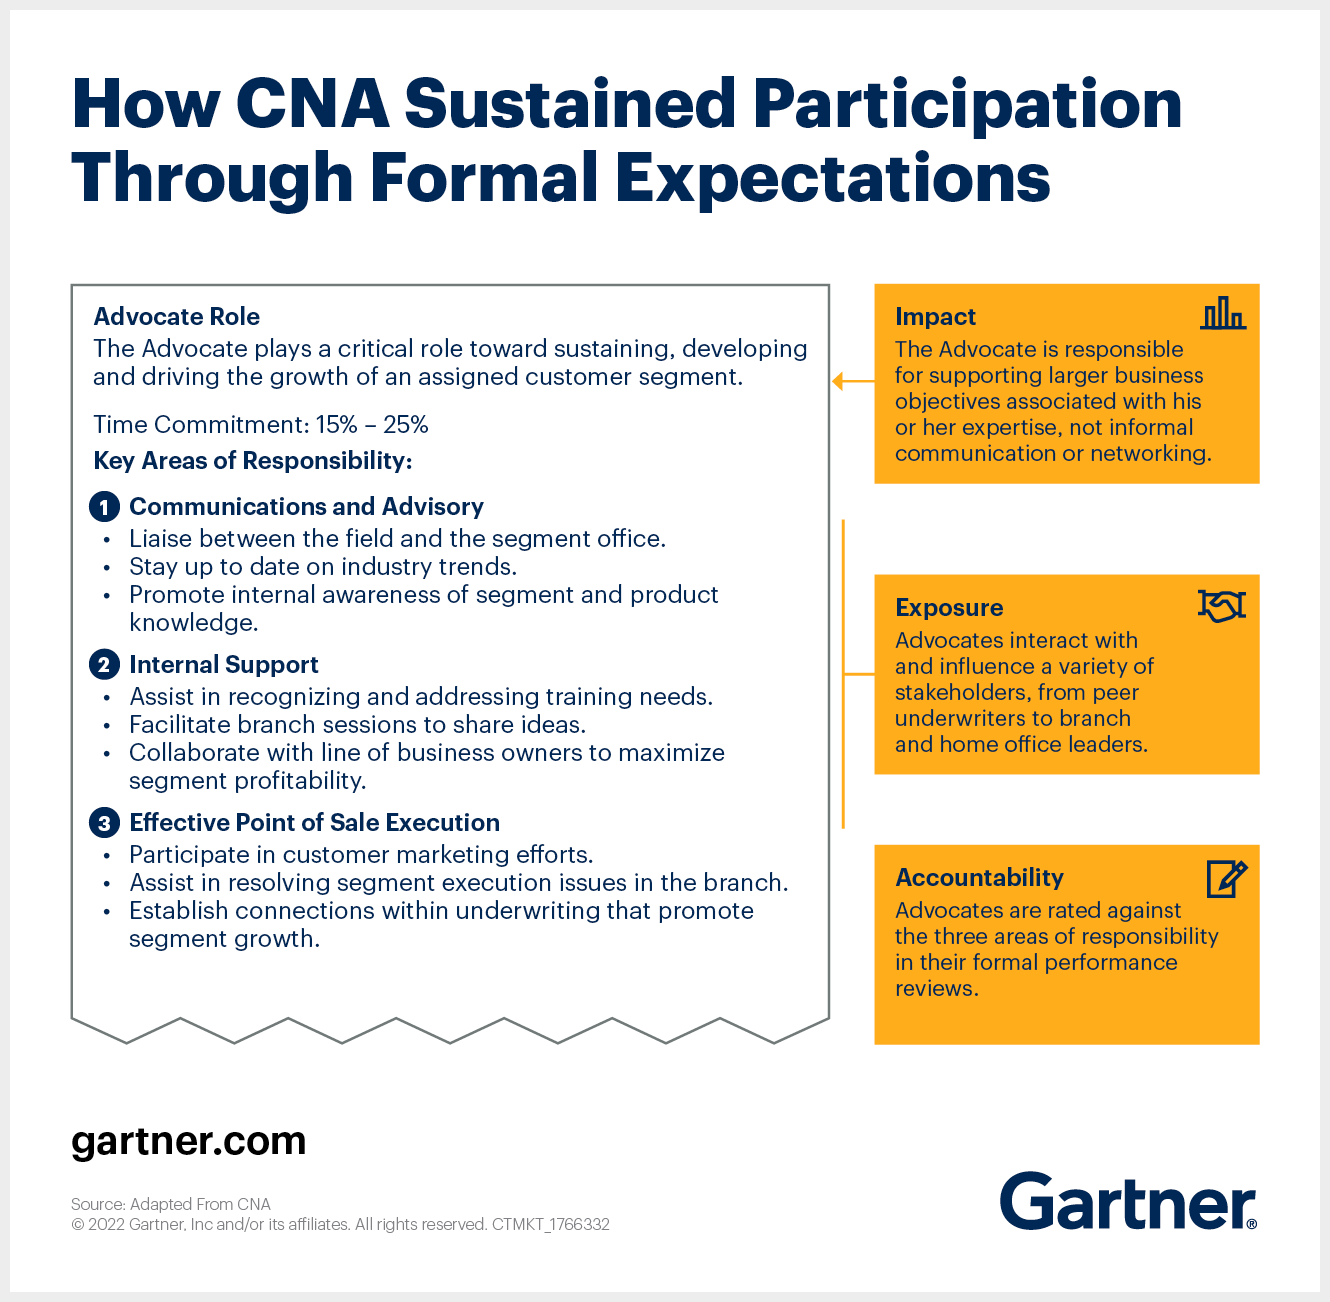 How CNA Sustained Participation Through Formal Expectations